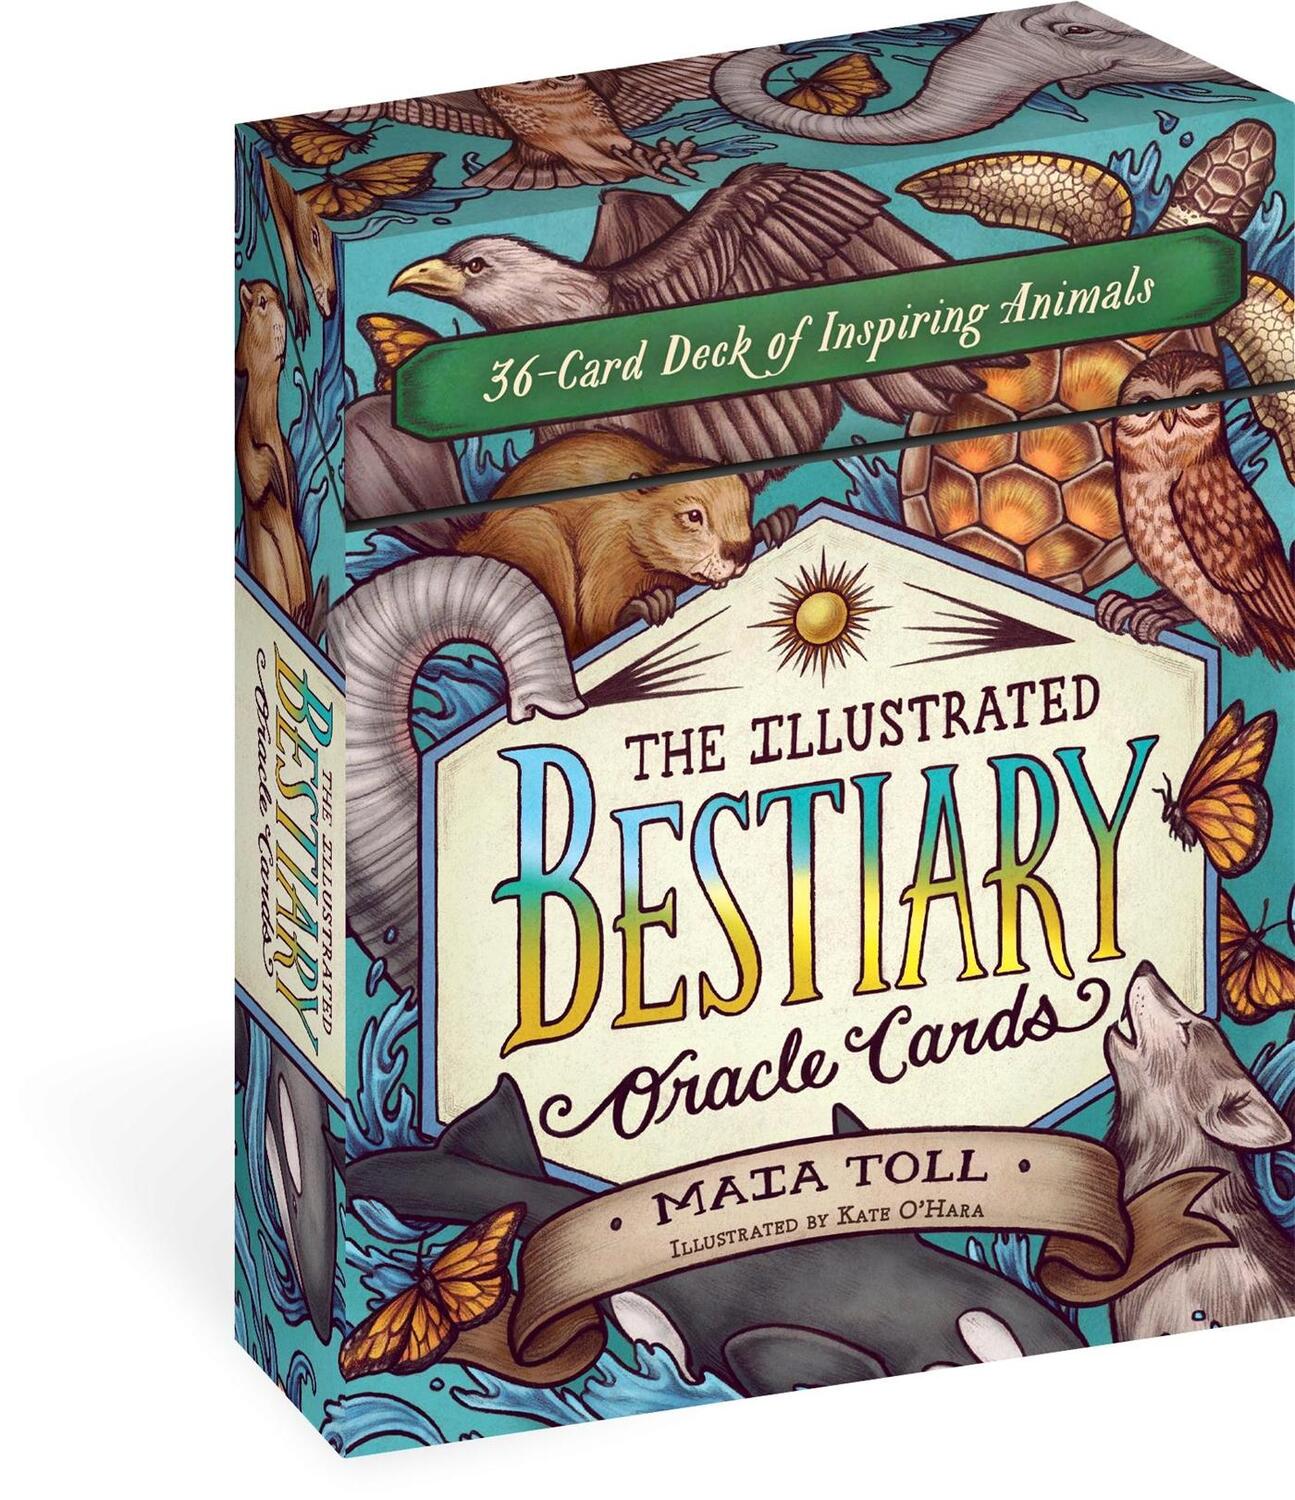 Cover: 9781635864861 | The Illustrated Bestiary Oracle Cards | Mata Toll | Wild Wisdom | 2021